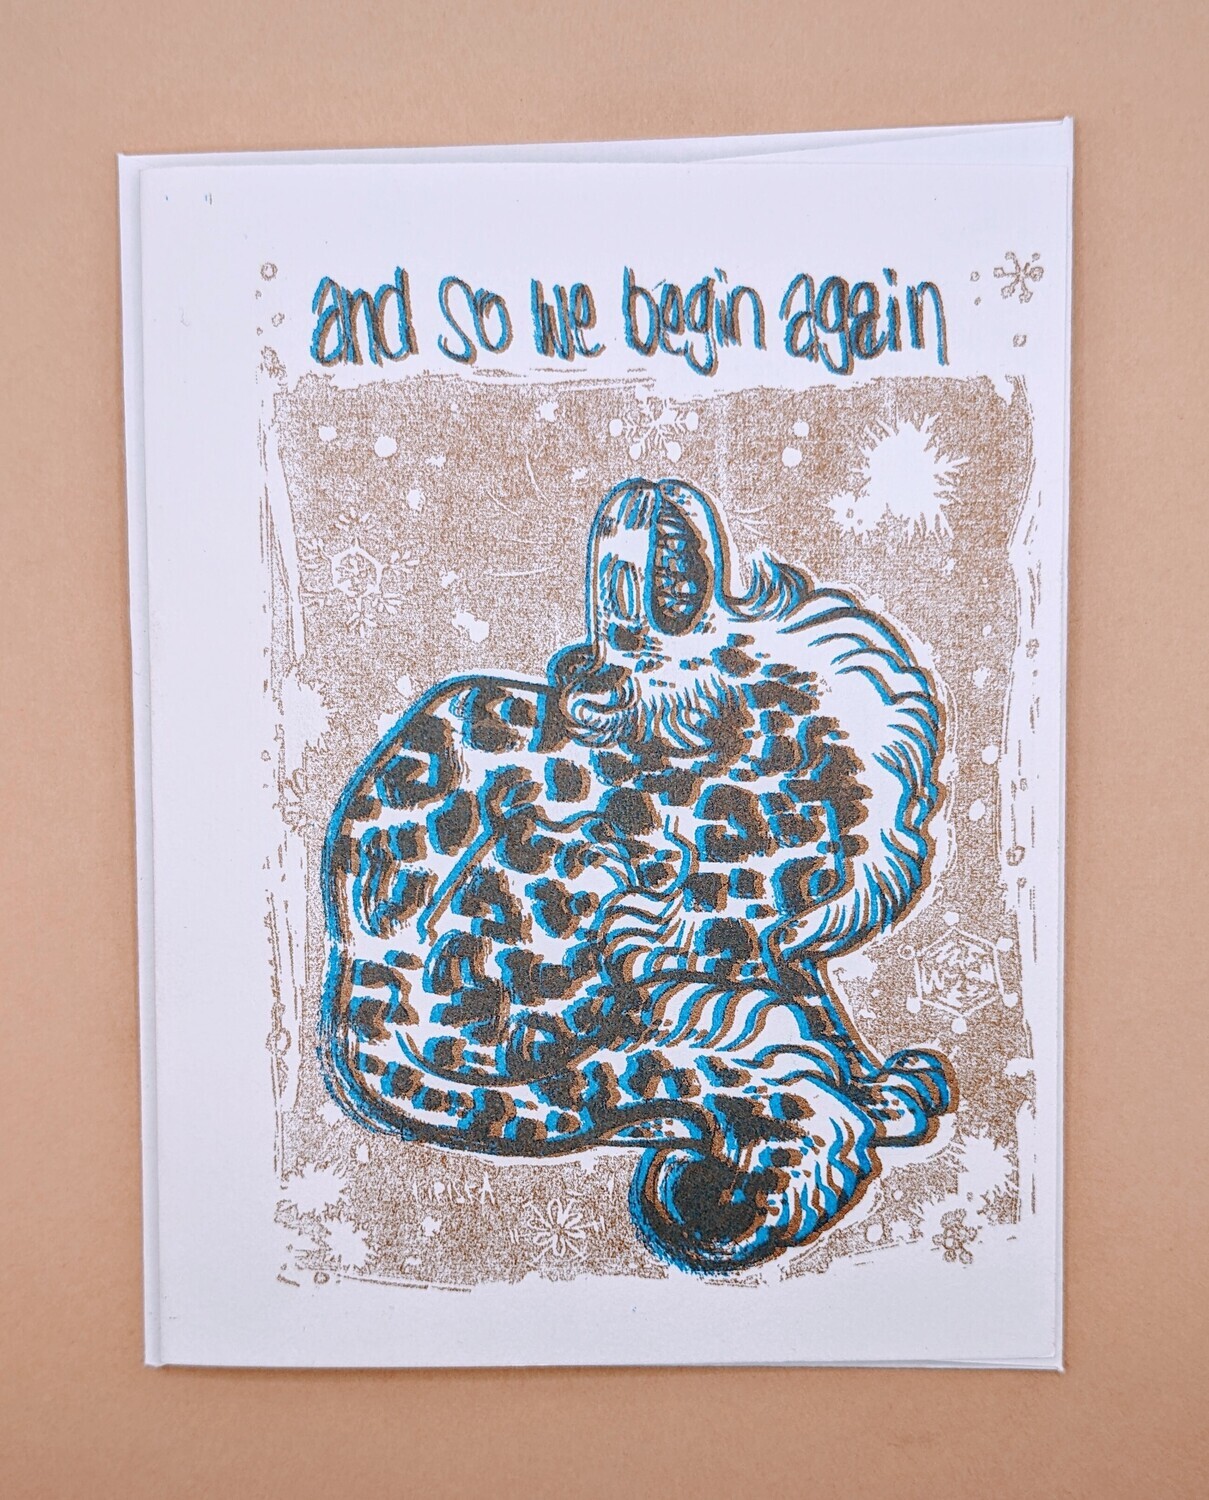 "And So..." Blank Greeting Card by Push/Pull Press